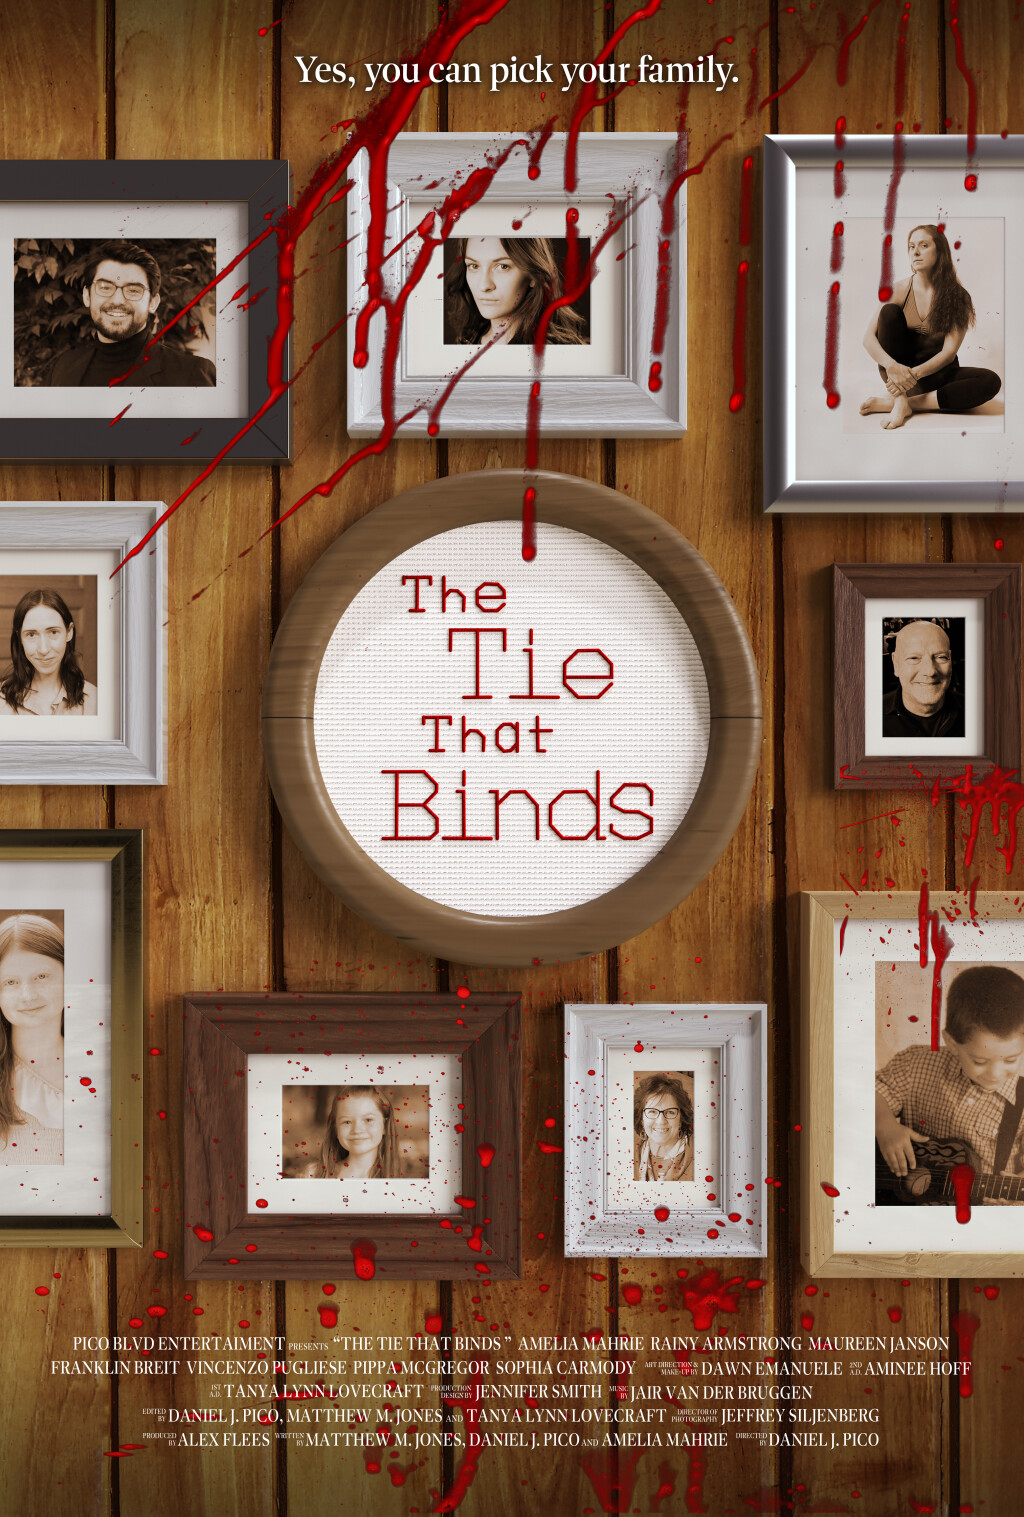 Filmposter for The Tie That Binds